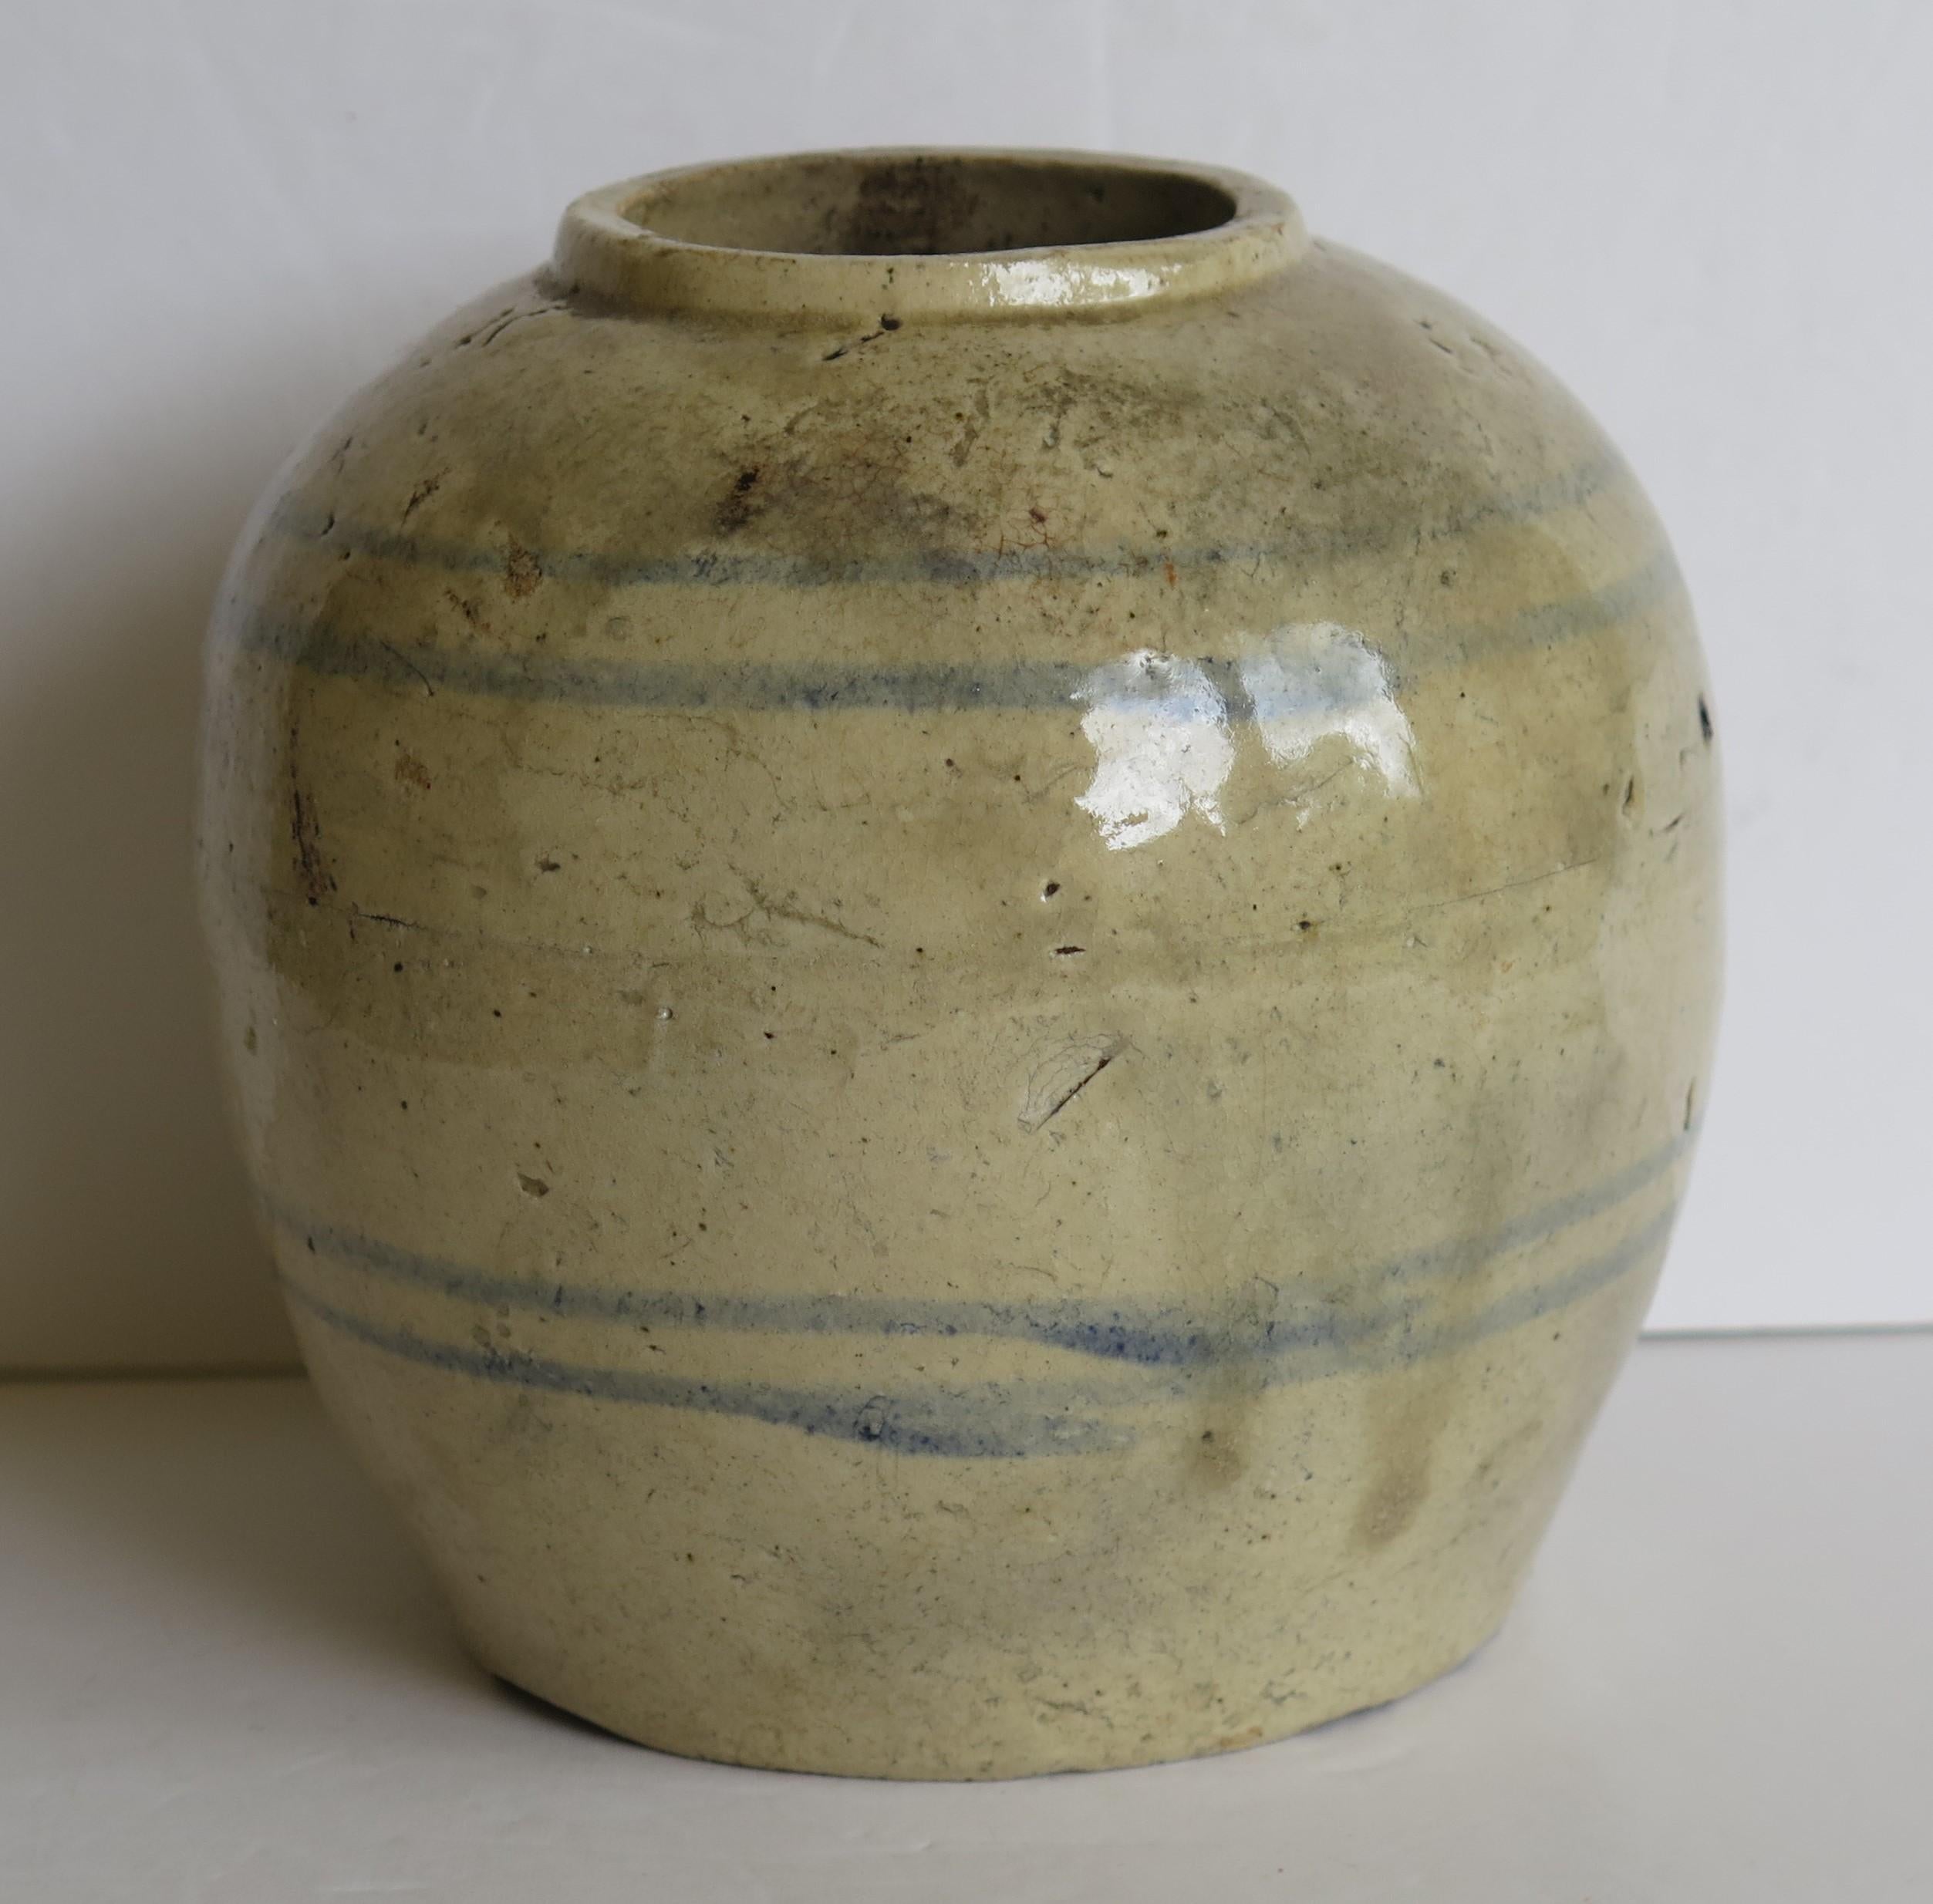 Hand-Crafted Chinese Ceramic Ming Provincial Jar or Vase Celadon Glaze, Early 17th Century